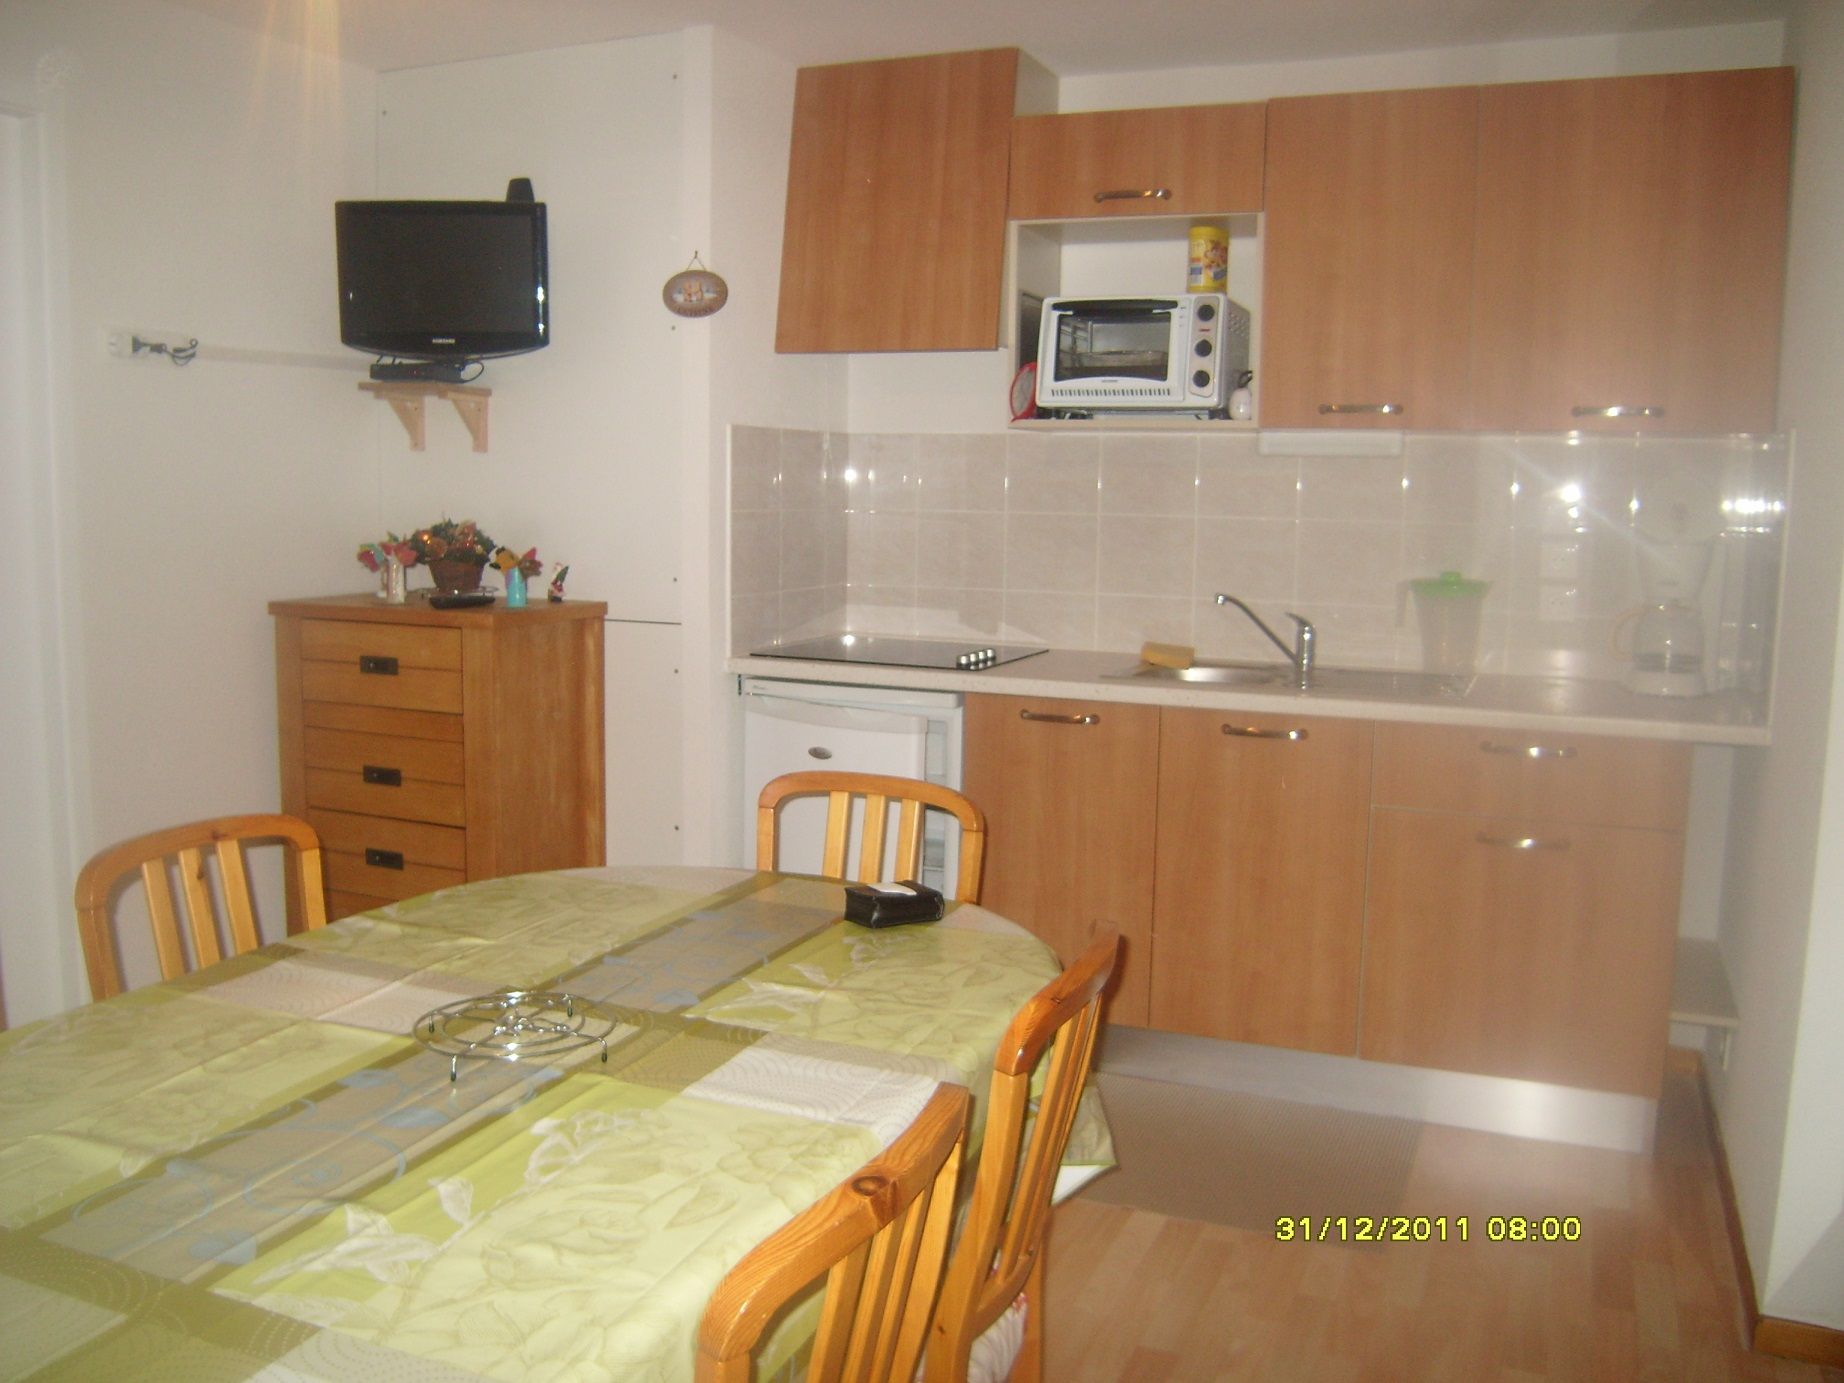 Apartment in residence - 42m² - 1 bedroom - Duplouich Gérard